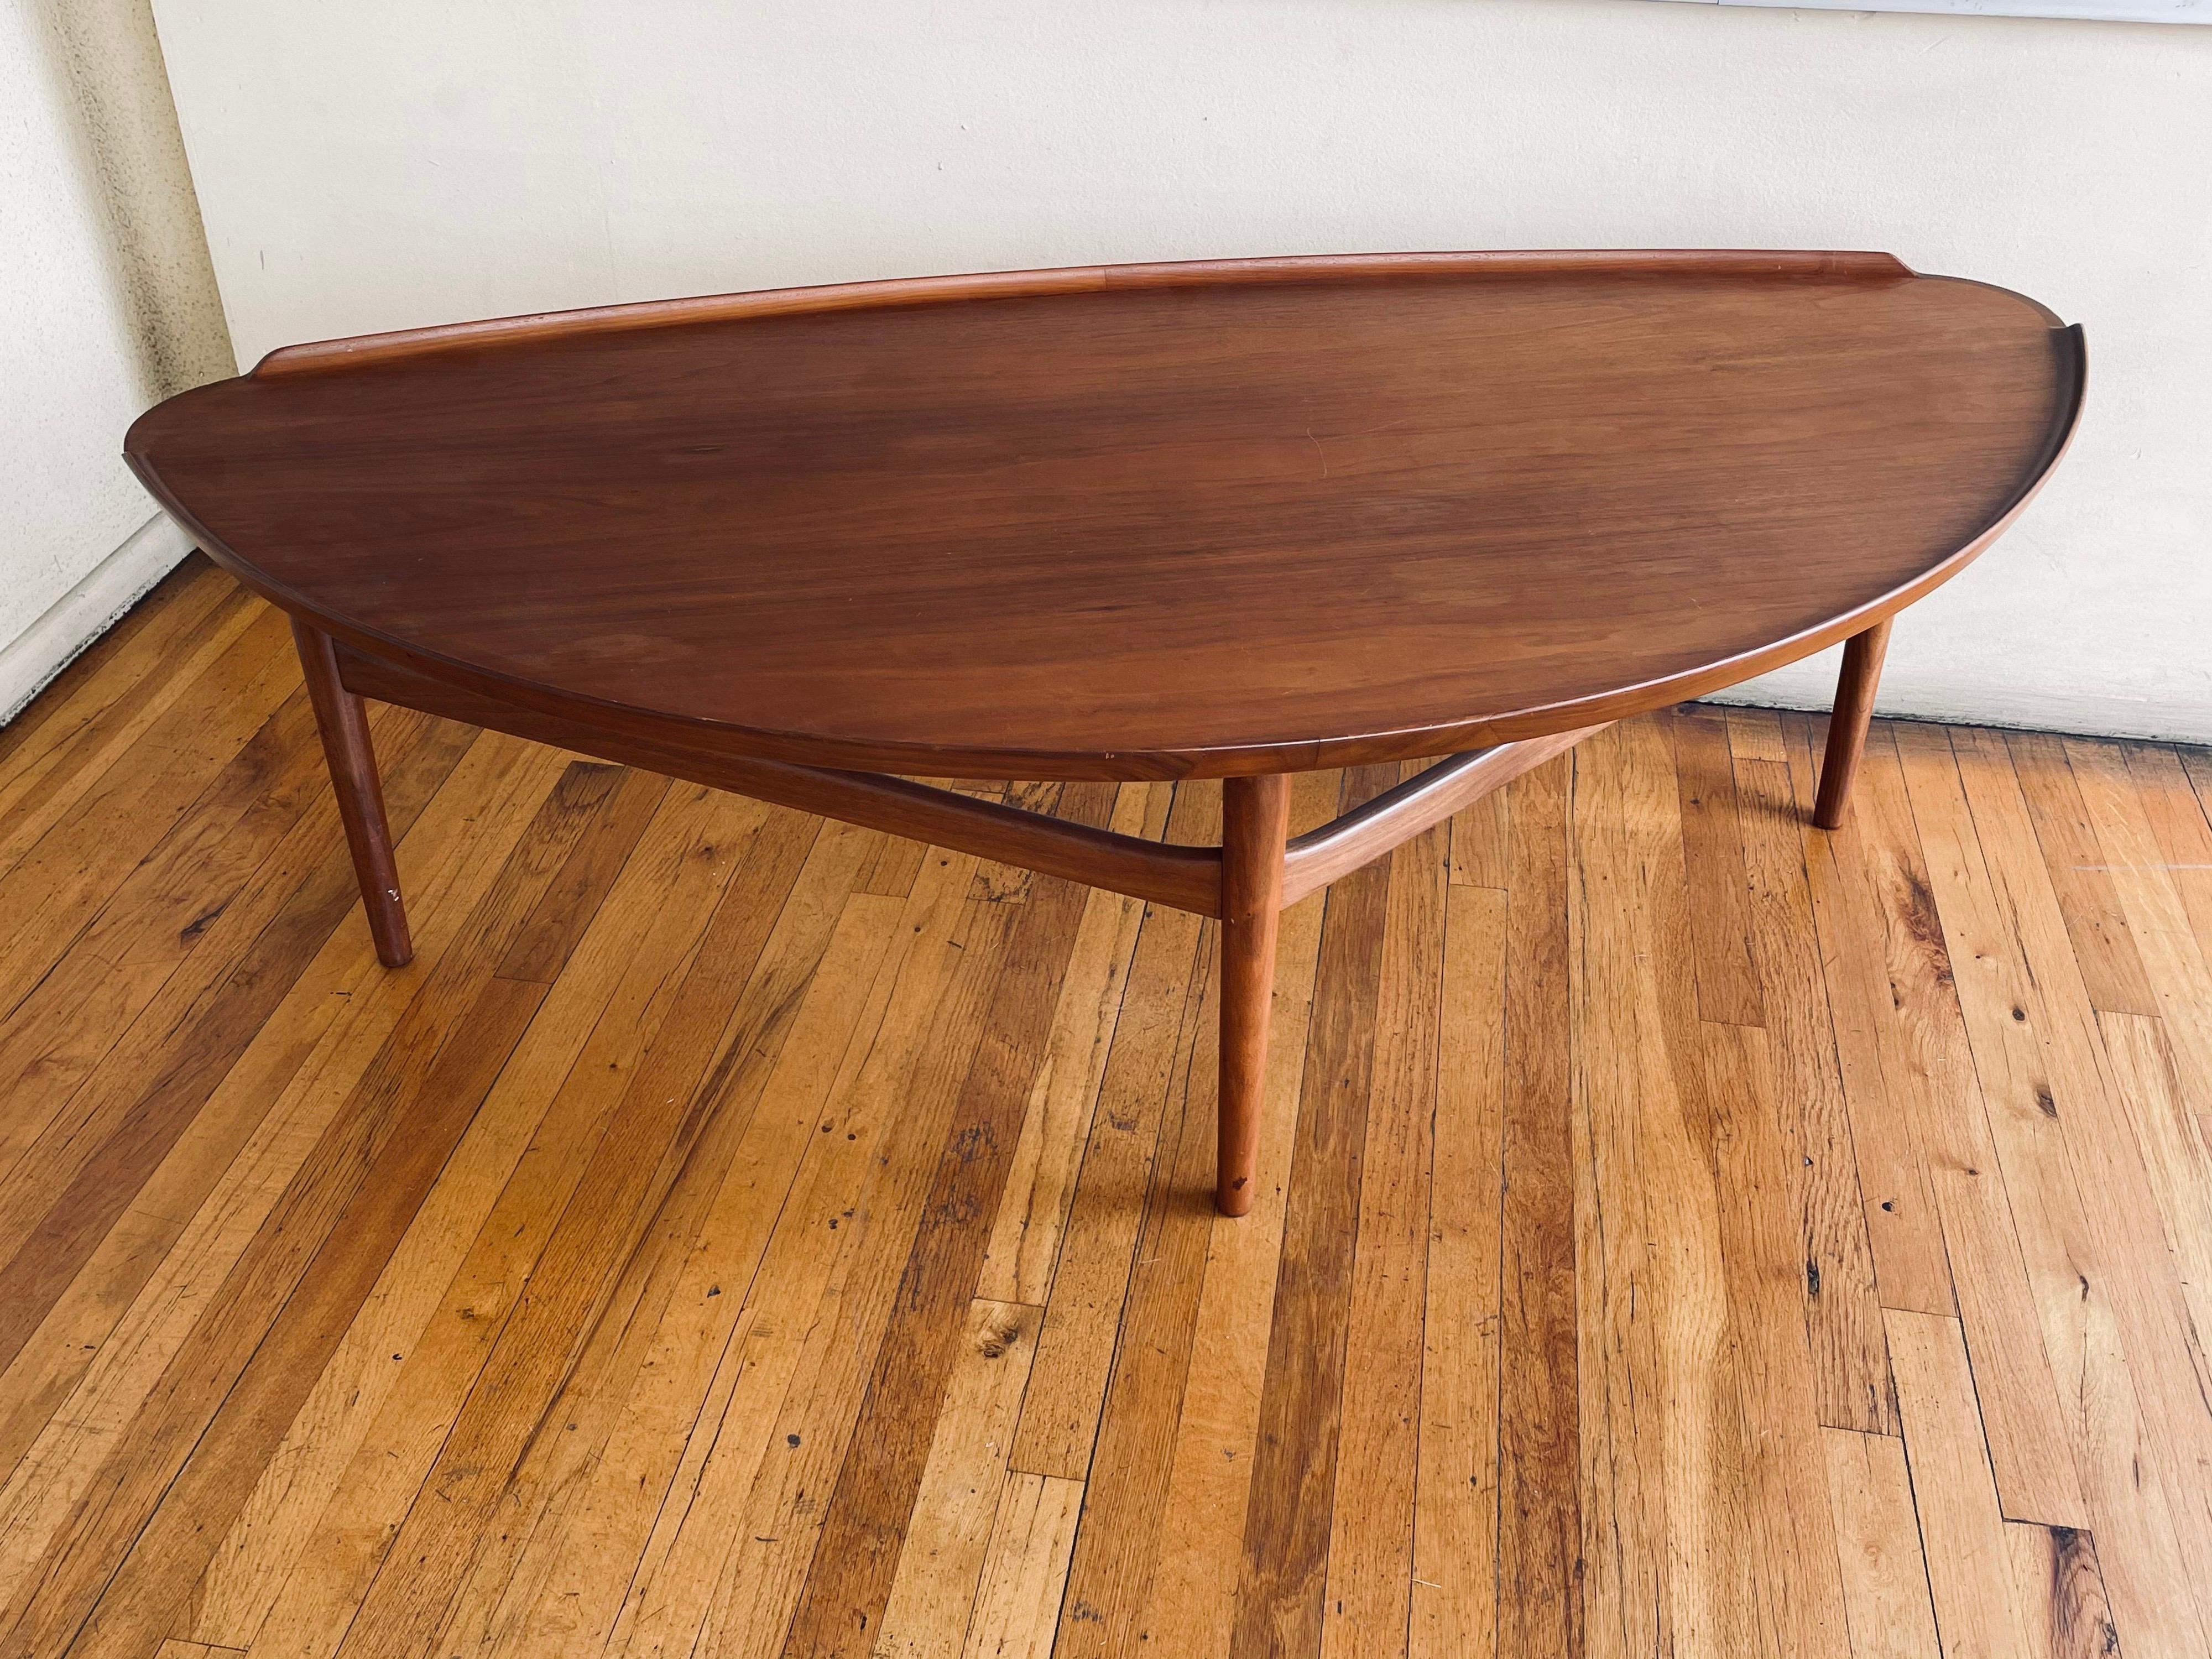 Beautiful large coffee table designed by Finn Juhl for Baker Furniture, circa 1950's nice condition in walnut finish raised edge and medallion mark.